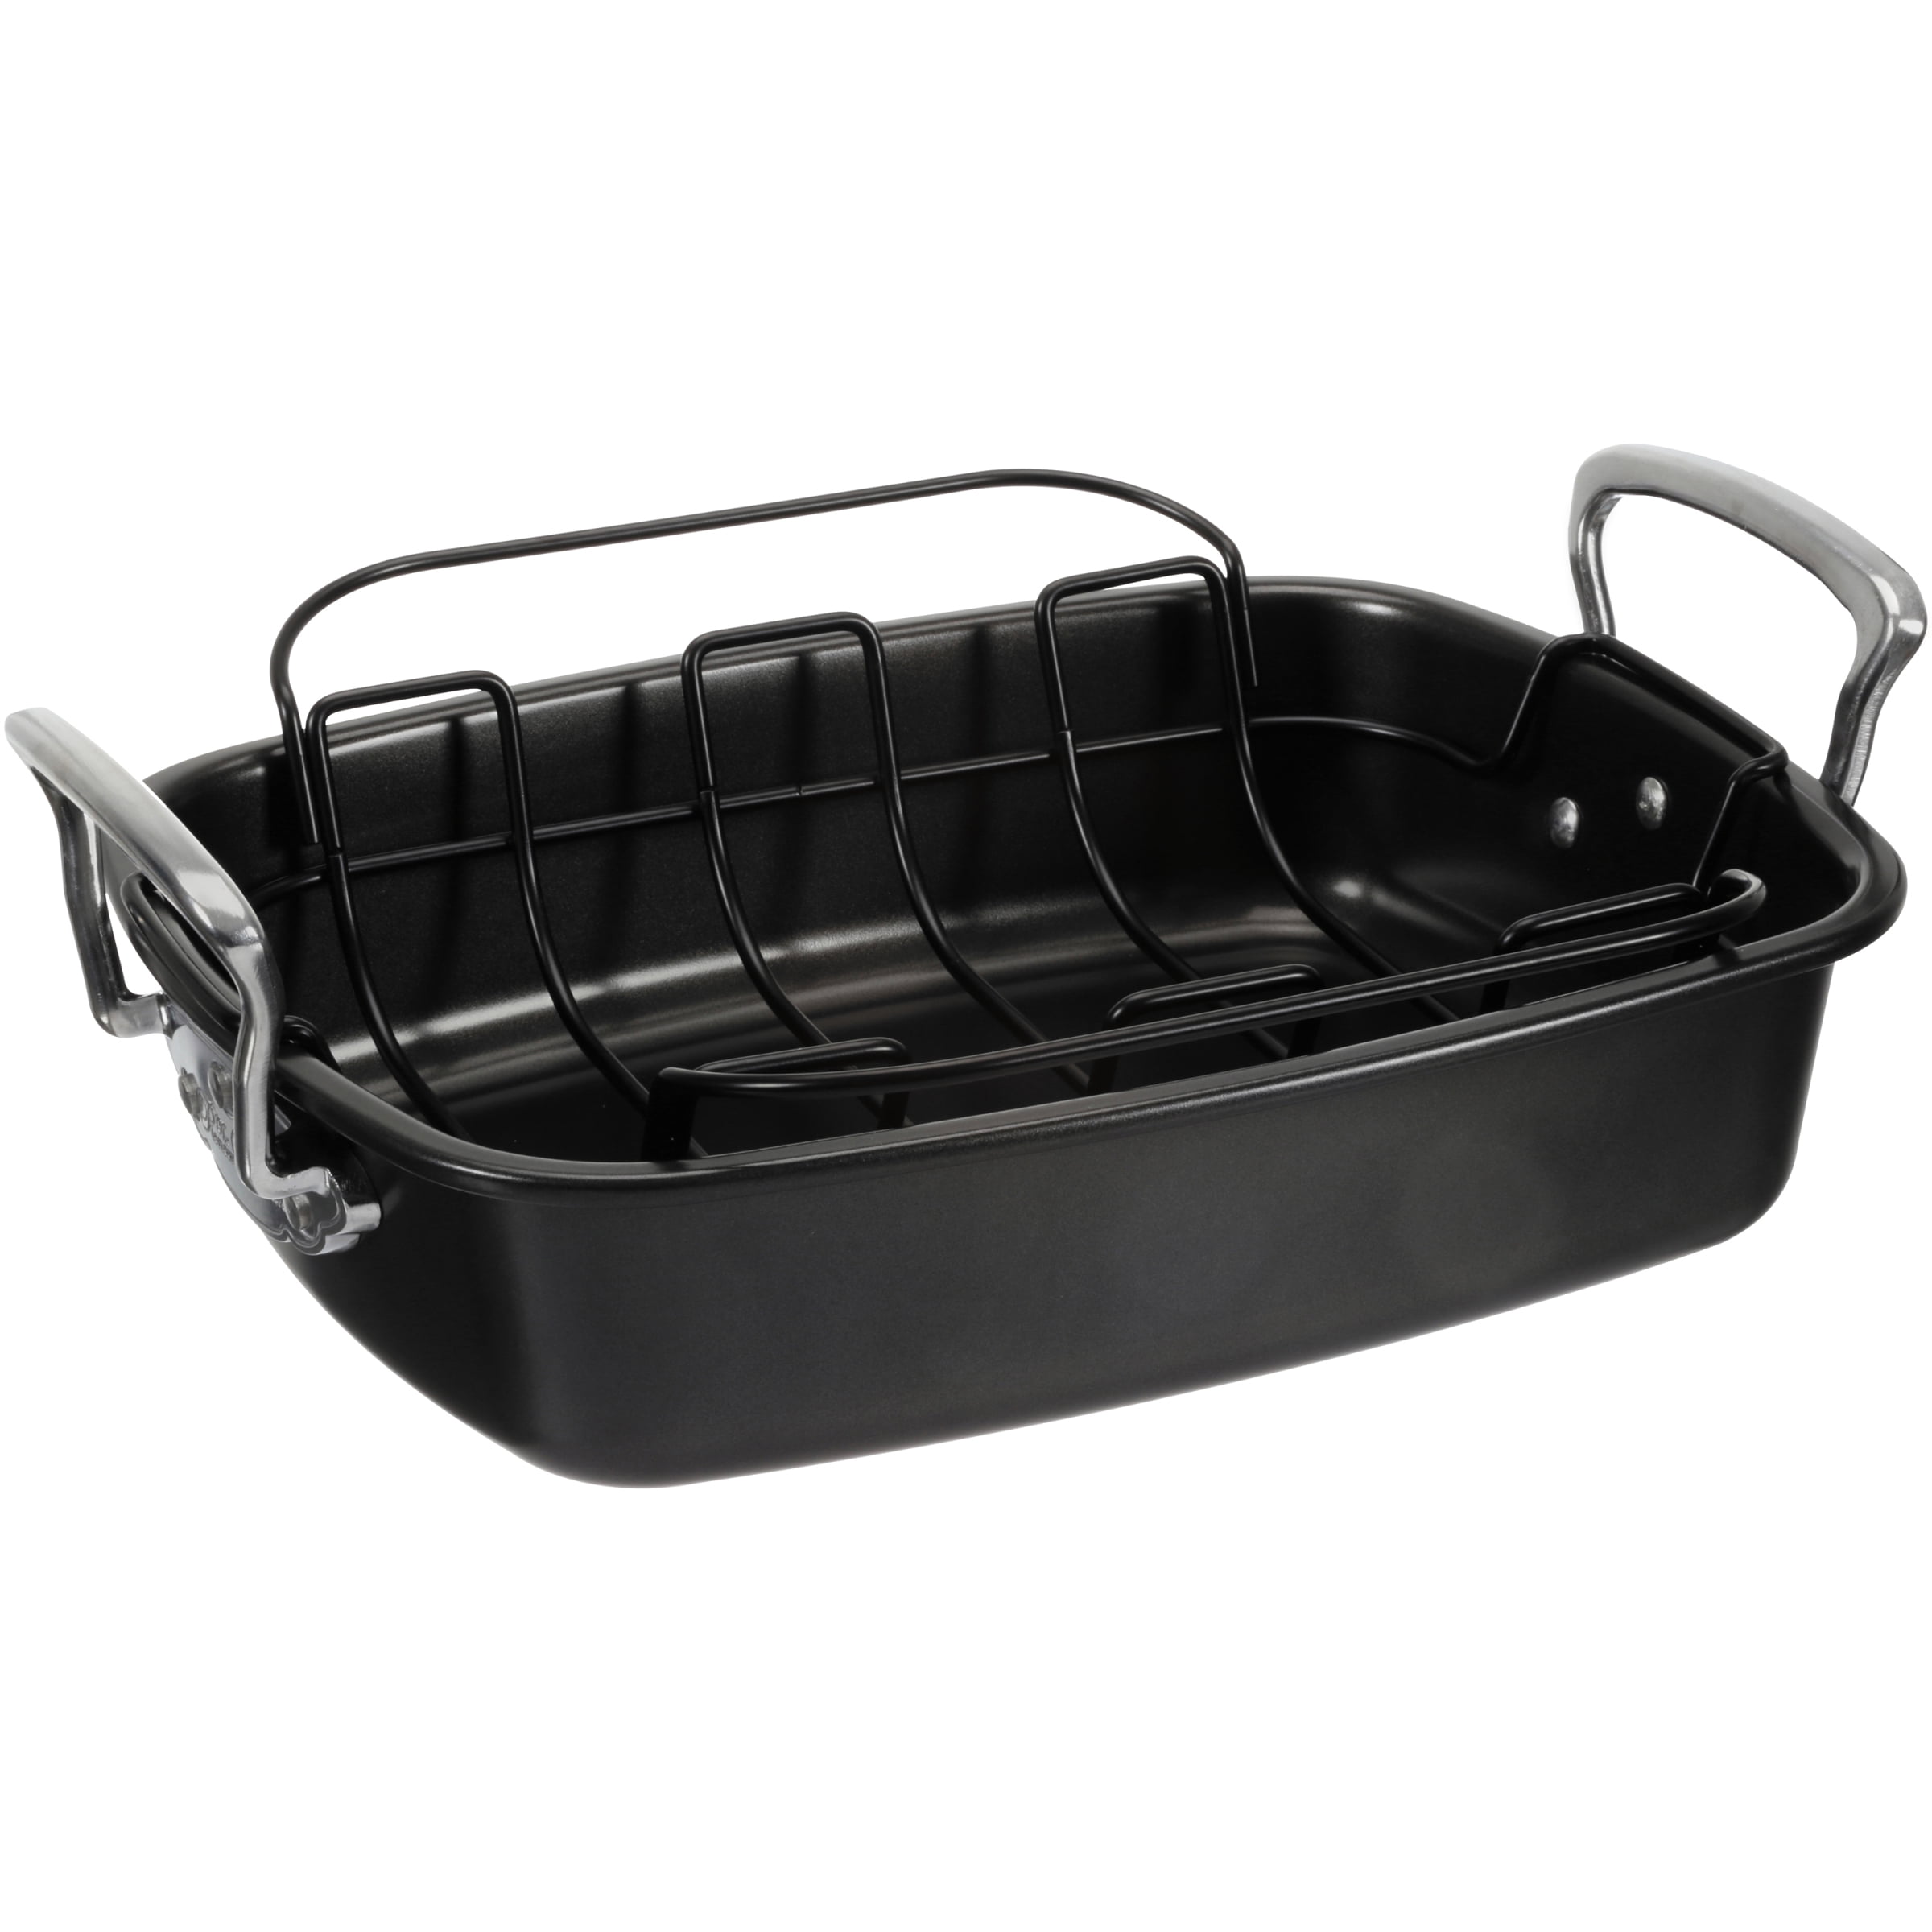 The Pioneer Woman Timeless Nonstick Roaster with Wire Rack Insert..